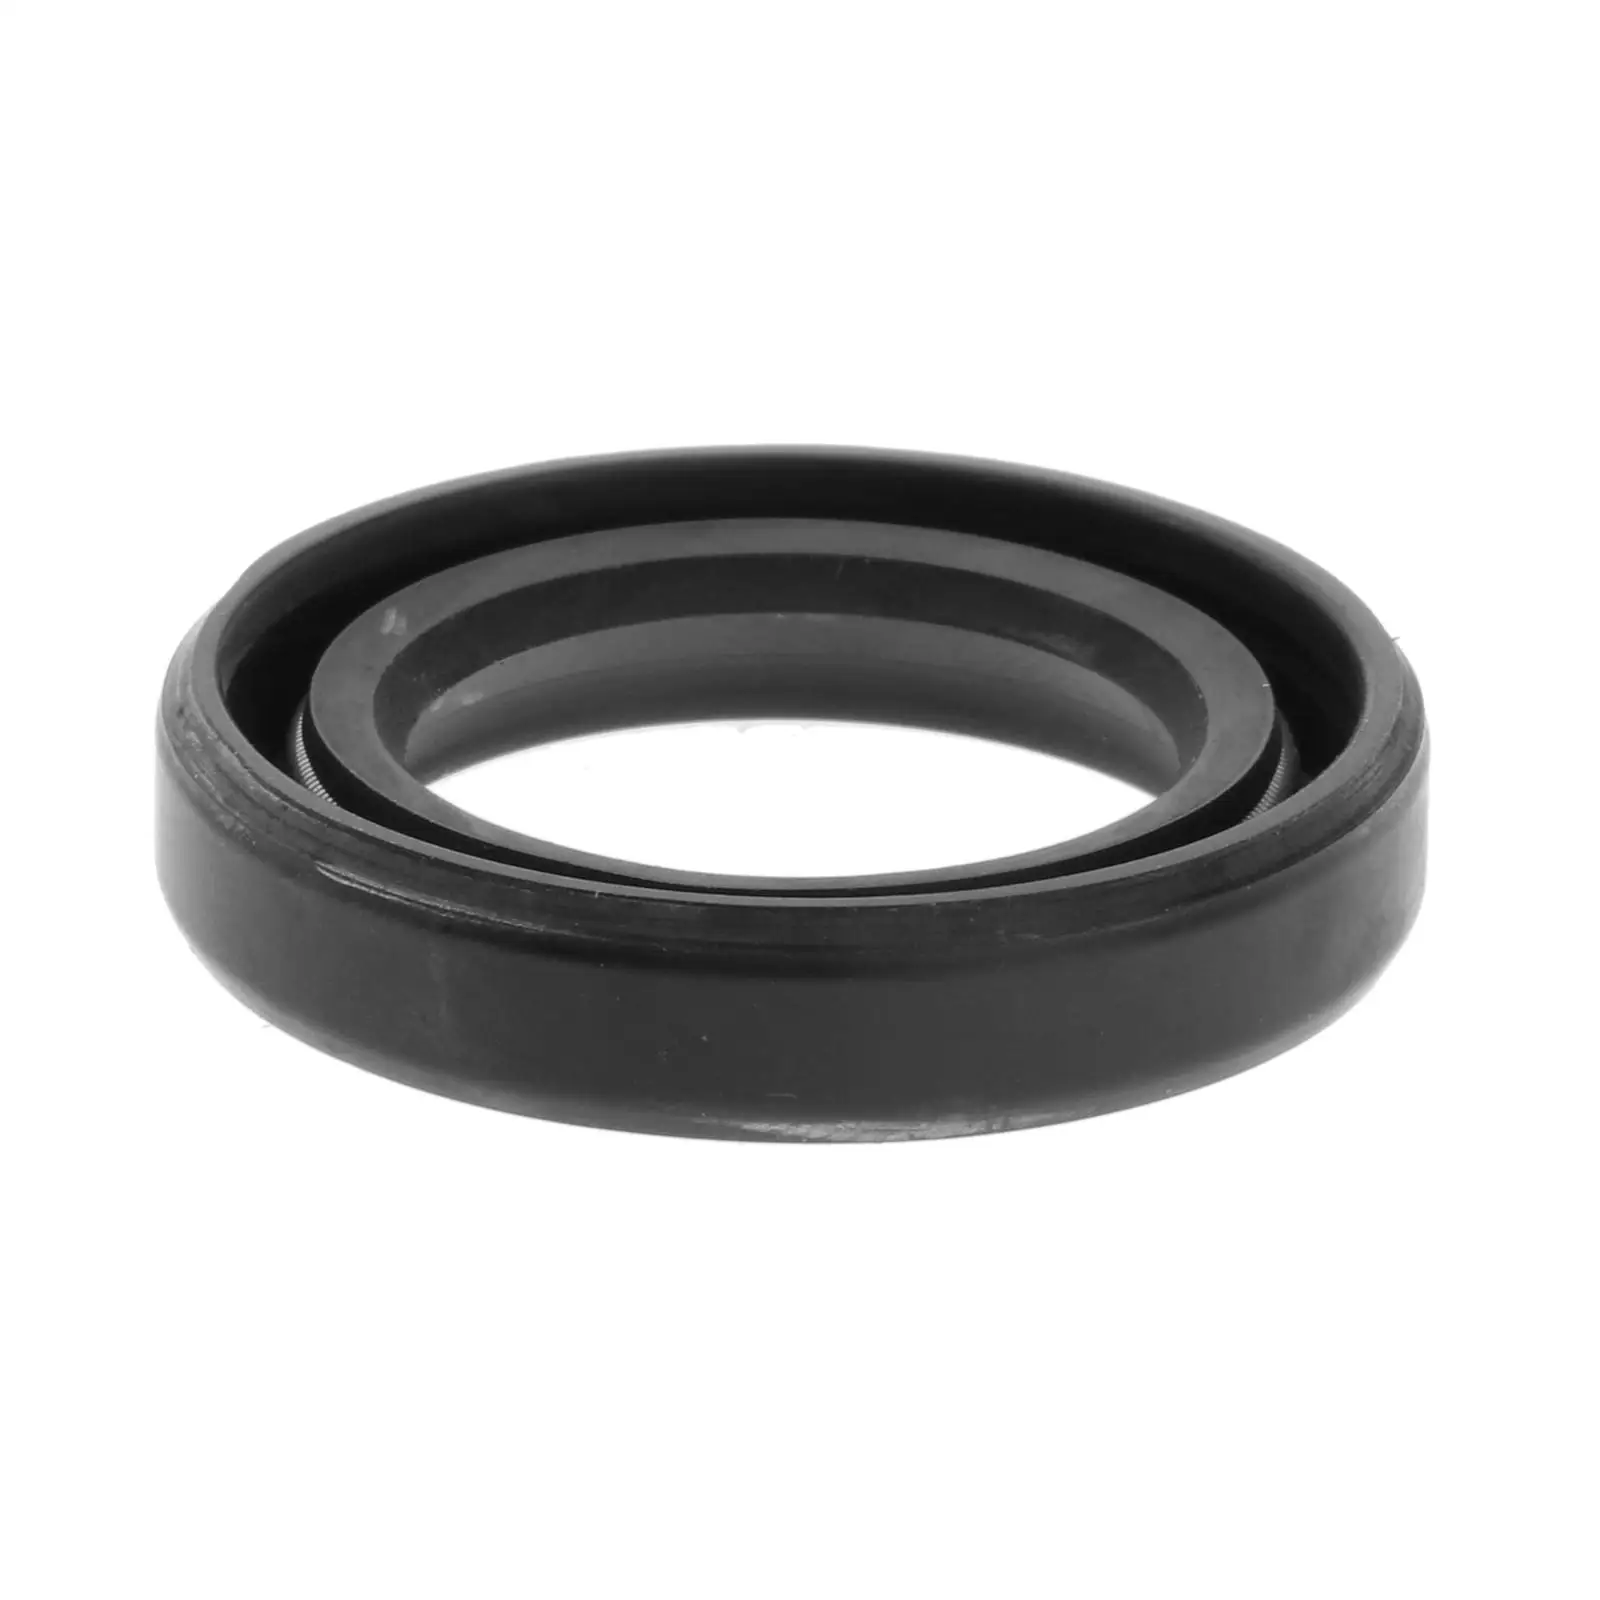 Oil Seal S-type Replace Parts Accessory for Yamaha Outboard Model